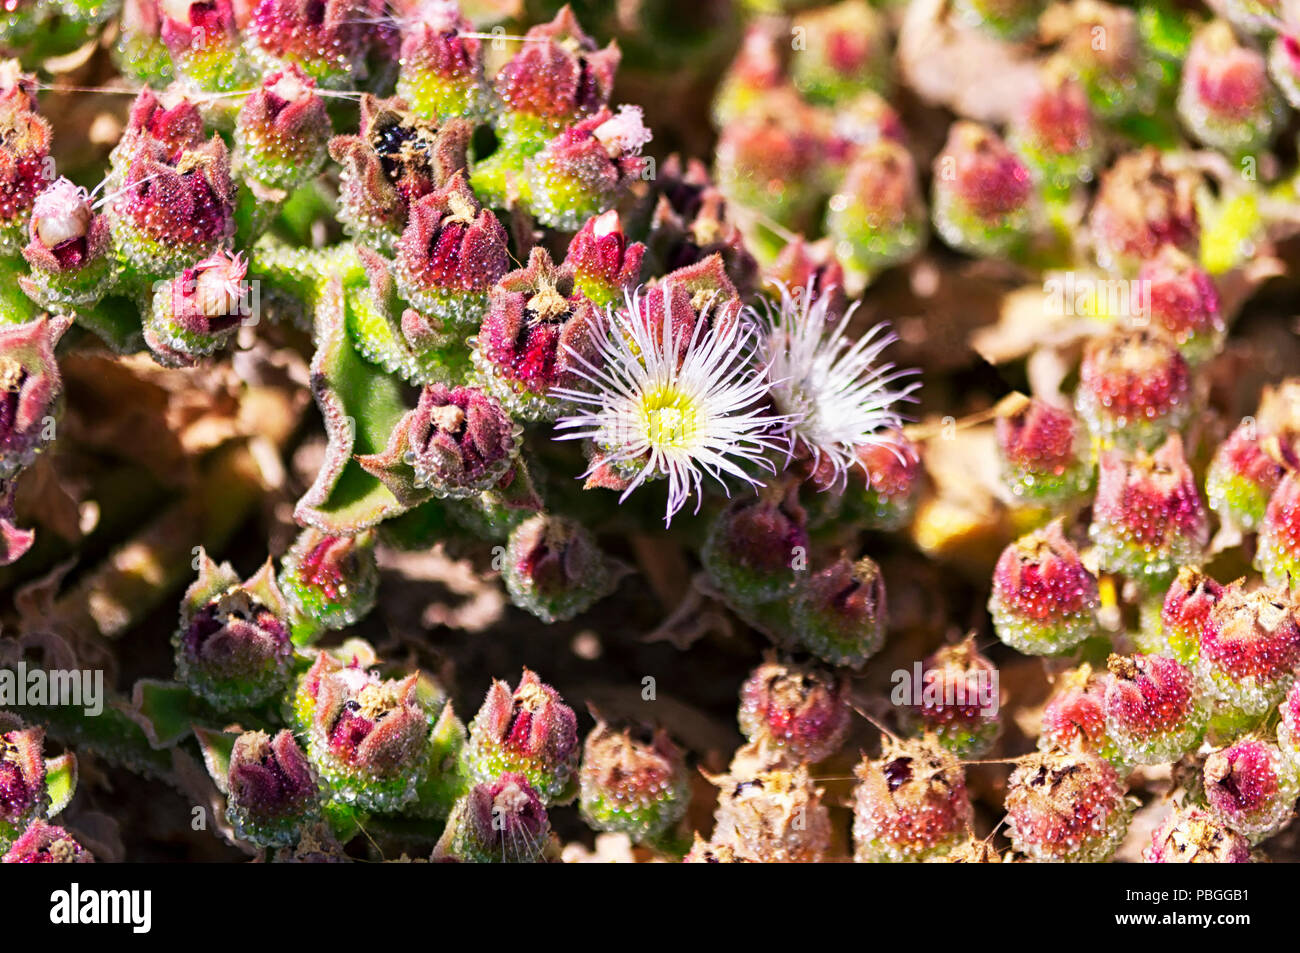 Mesembryanthemum crystallinum is a prostrate succulent plant along the Pacific Coast Highway in Malibu California. Stock Photo